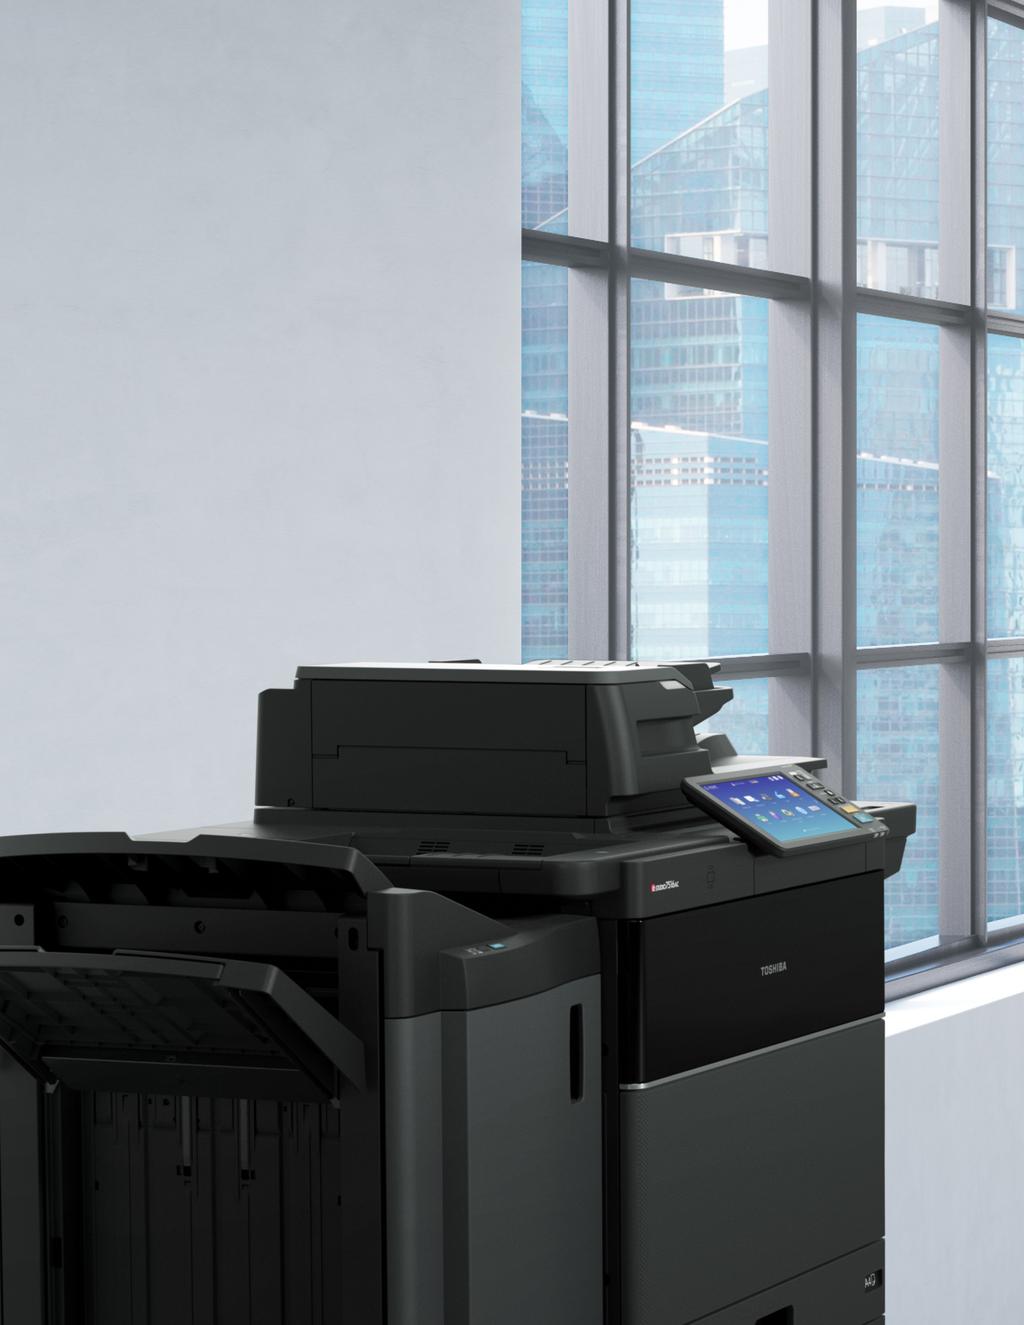 olor Multifunction Printer C p to 75 PPM Color U p to 85 PPM Black &